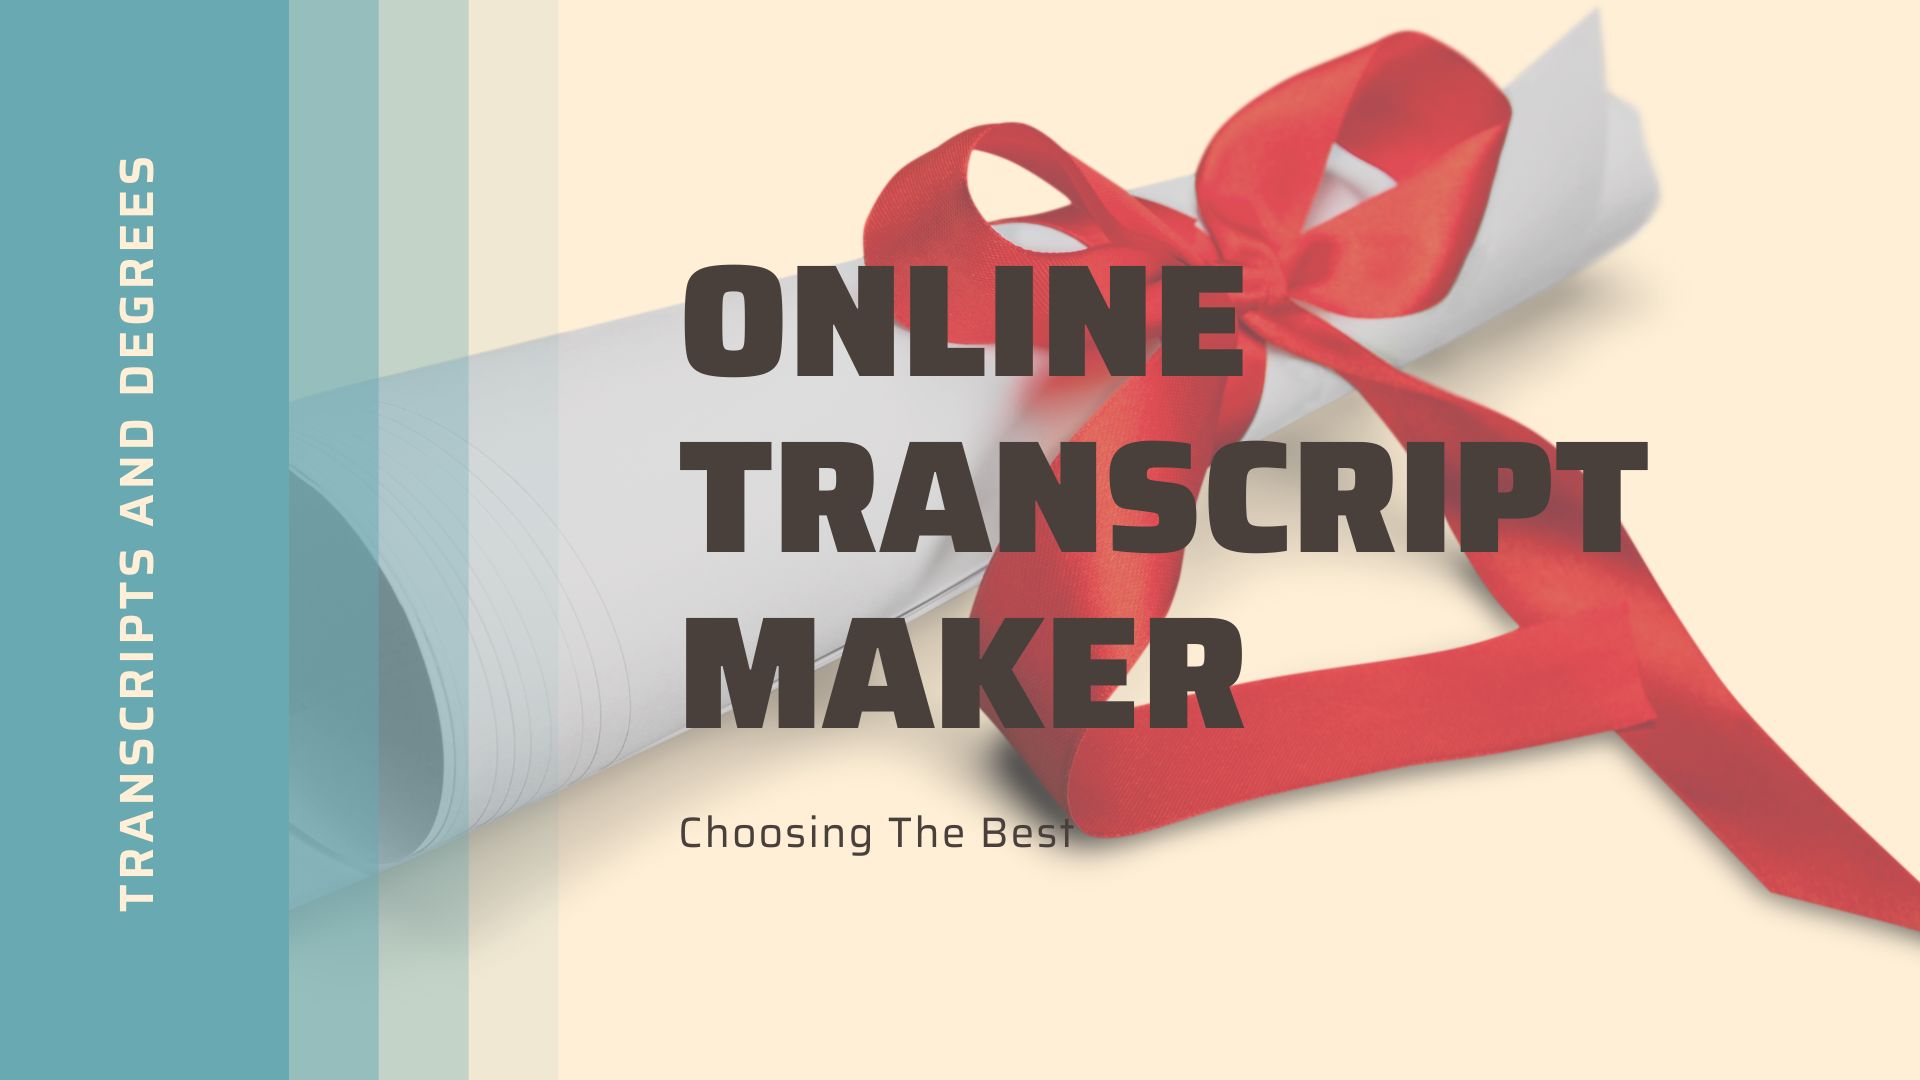 image with blurred background of rolled up transcript with red ribbon on top with text saying online transcripts maker